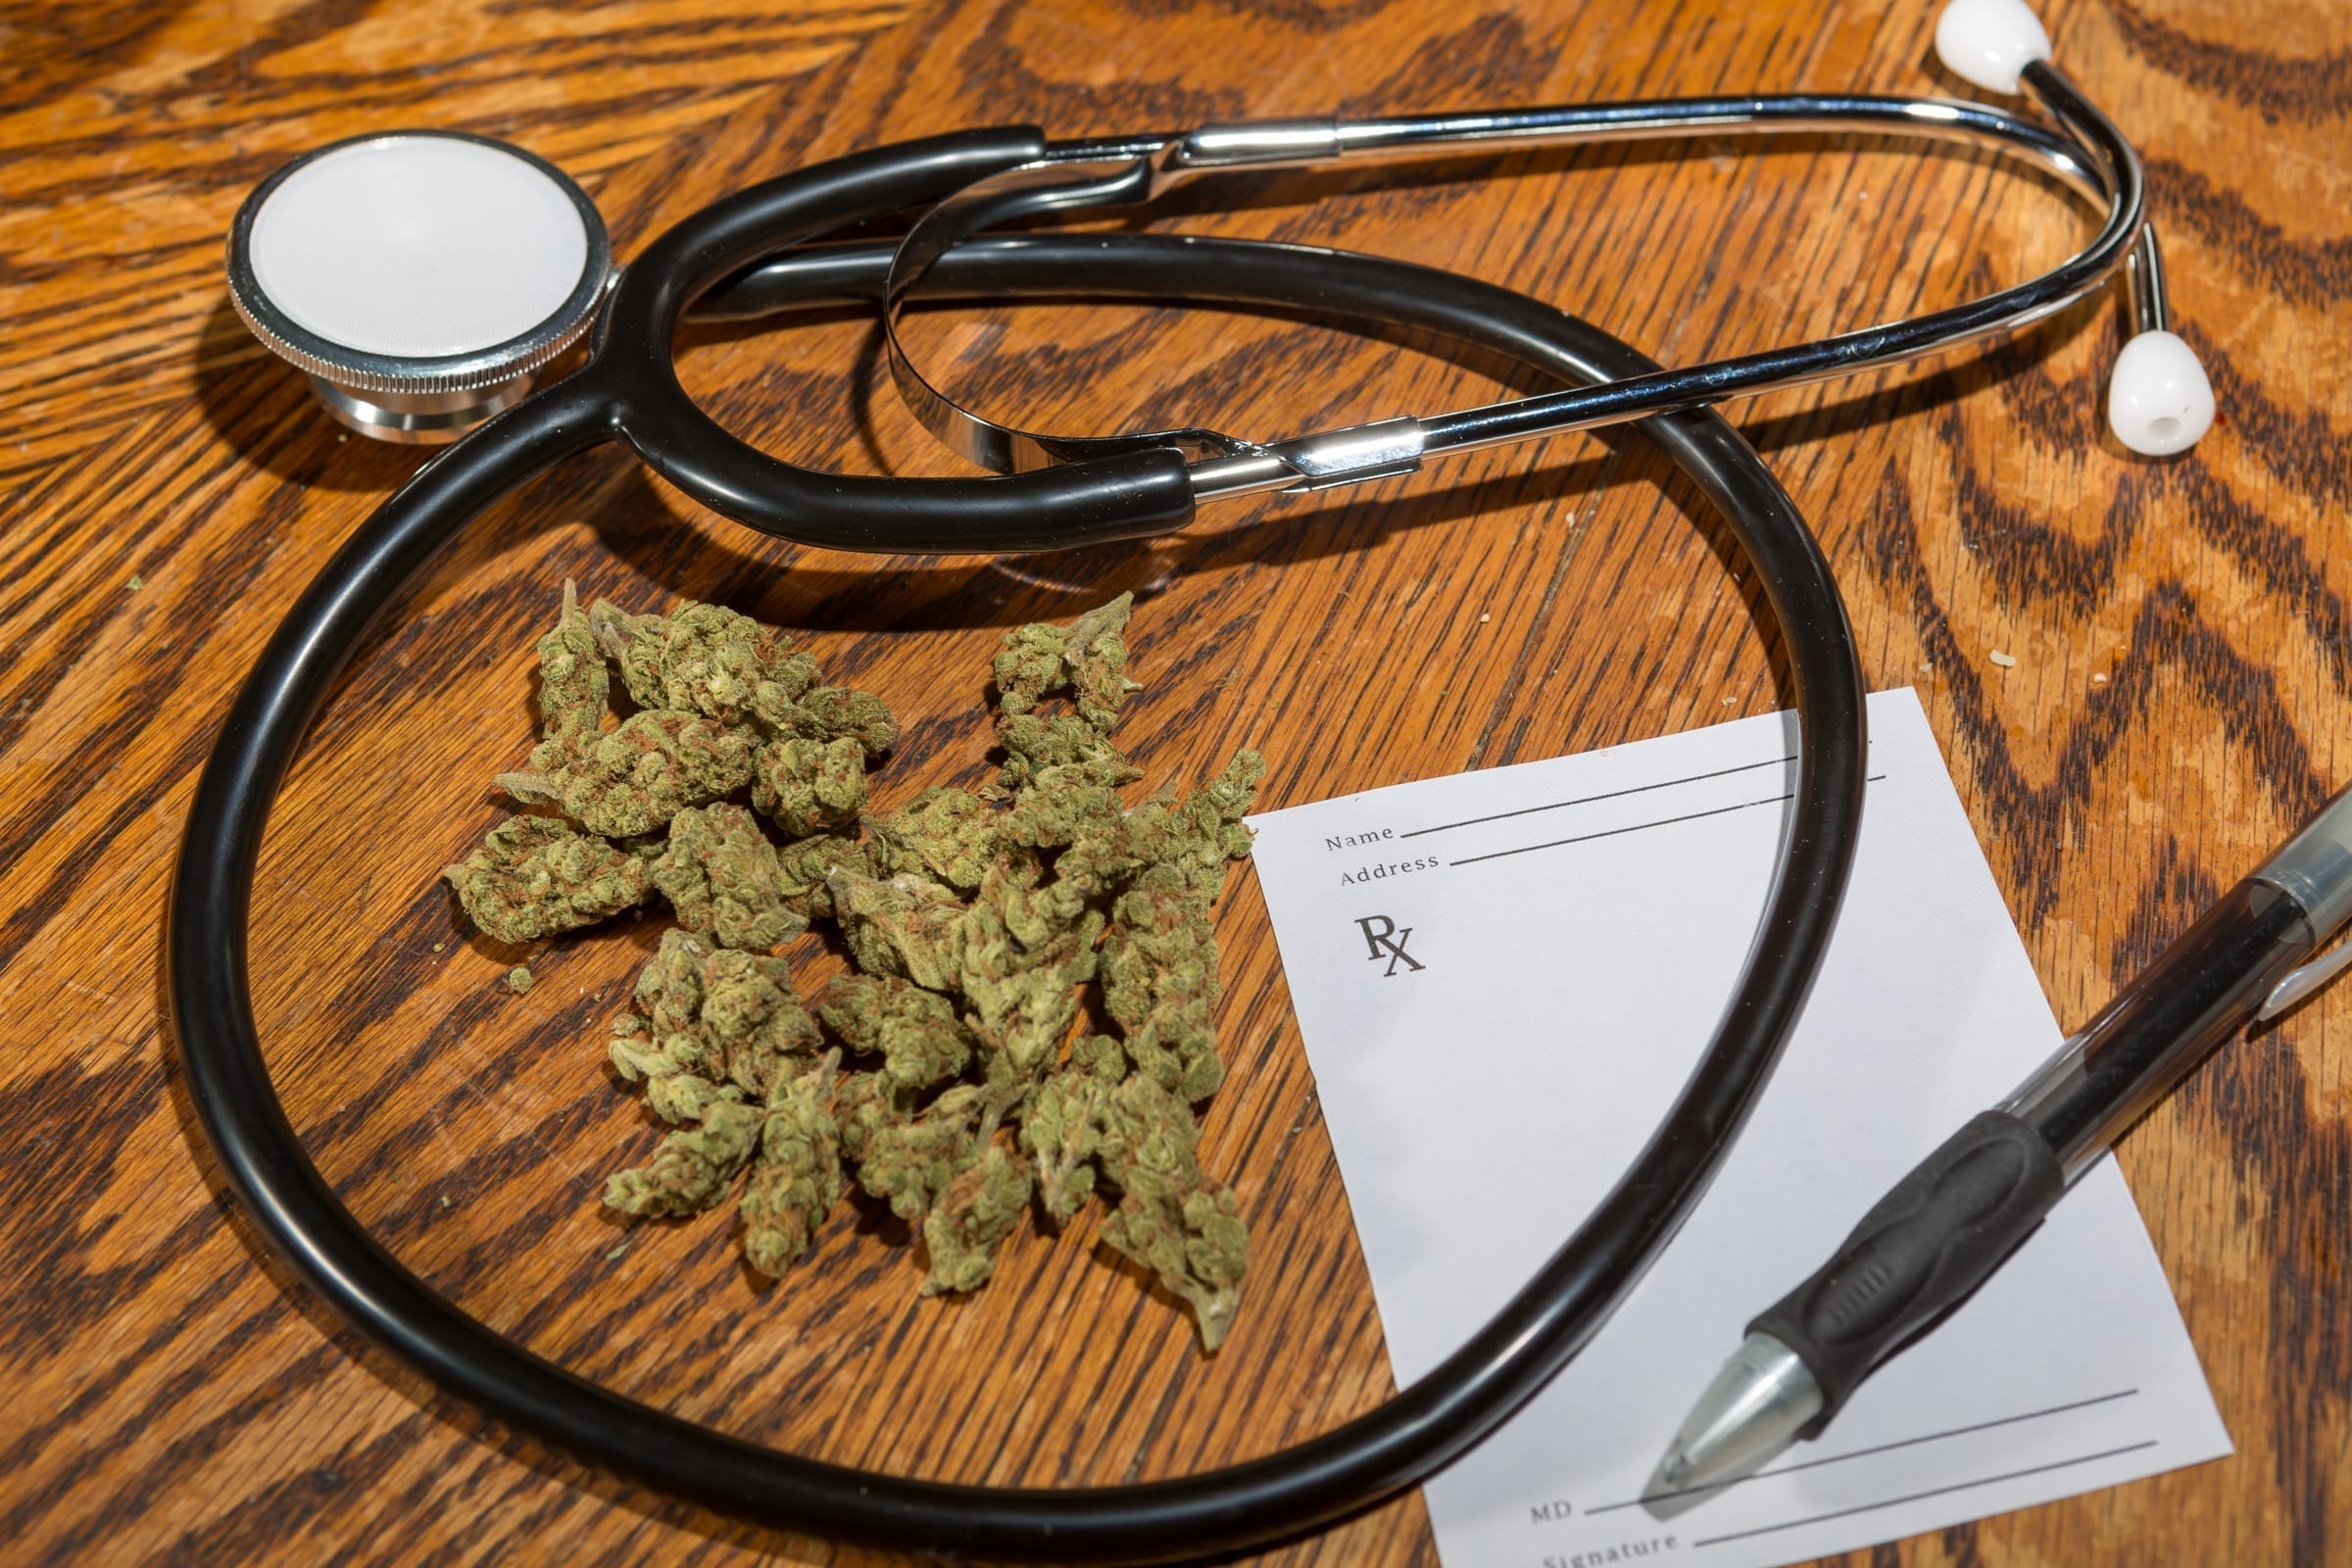 Legal Medical Marijuana Tied To Lower Opioid Use, Another ...